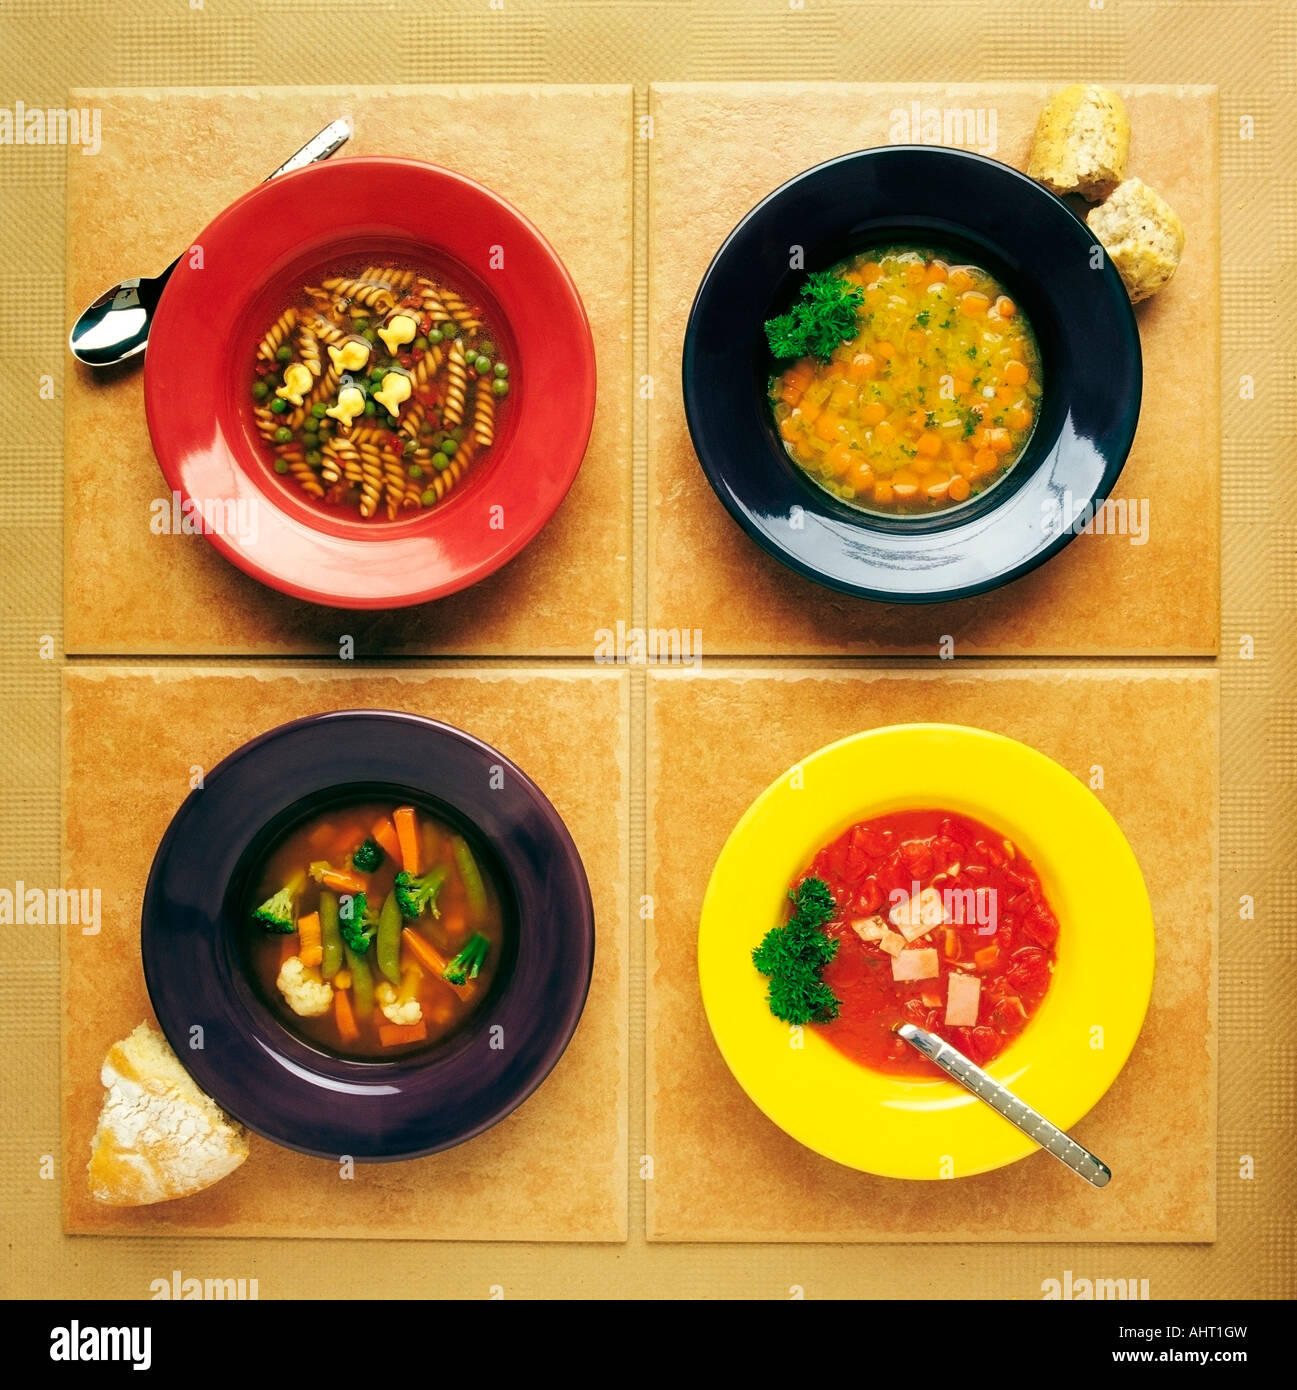 Four dishes of different food Stock Photo